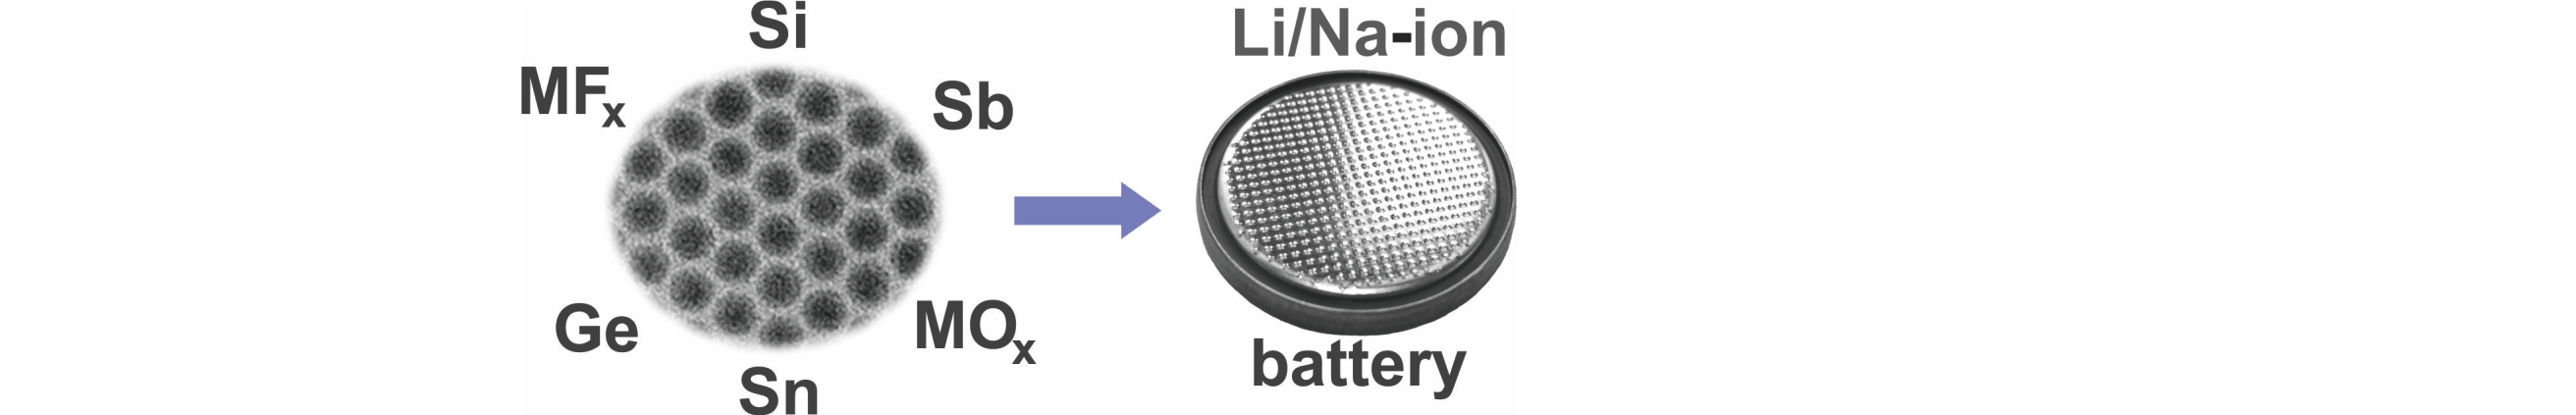 Precisely Engineered Colloidal Nanoparticles and Nanocrystals for Li-Ion and Na-Ion Batteries: Model Systems or Practical Solutions?